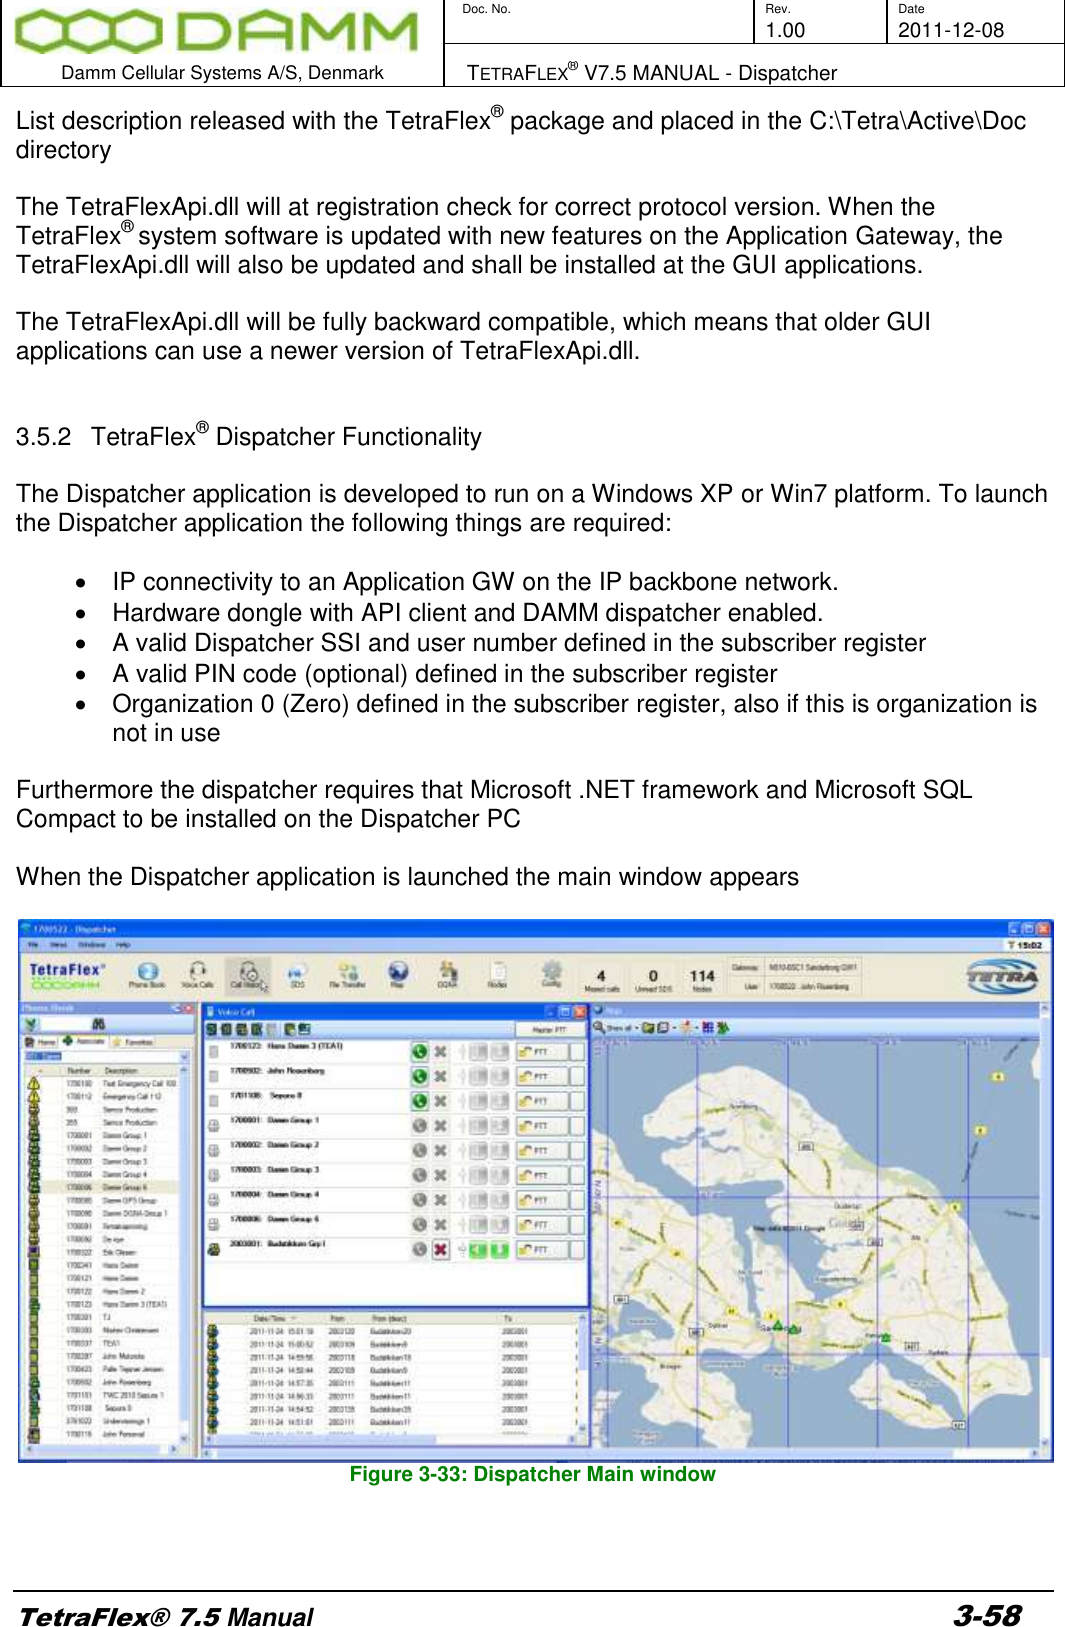        Doc. No. Rev. Date     1.00 2011-12-08  Damm Cellular Systems A/S, Denmark   TETRAFLEX® V7.5 MANUAL - Dispatcher  TetraFlex® 7.5 Manual 3-58 List description released with the TetraFlex® package and placed in the C:\Tetra\Active\Doc directory  The TetraFlexApi.dll will at registration check for correct protocol version. When the TetraFlex® system software is updated with new features on the Application Gateway, the TetraFlexApi.dll will also be updated and shall be installed at the GUI applications.  The TetraFlexApi.dll will be fully backward compatible, which means that older GUI applications can use a newer version of TetraFlexApi.dll.   3.5.2  TetraFlex® Dispatcher Functionality  The Dispatcher application is developed to run on a Windows XP or Win7 platform. To launch the Dispatcher application the following things are required:   IP connectivity to an Application GW on the IP backbone network.   Hardware dongle with API client and DAMM dispatcher enabled.   A valid Dispatcher SSI and user number defined in the subscriber register   A valid PIN code (optional) defined in the subscriber register   Organization 0 (Zero) defined in the subscriber register, also if this is organization is not in use  Furthermore the dispatcher requires that Microsoft .NET framework and Microsoft SQL Compact to be installed on the Dispatcher PC  When the Dispatcher application is launched the main window appears   Figure 3-33: Dispatcher Main window  